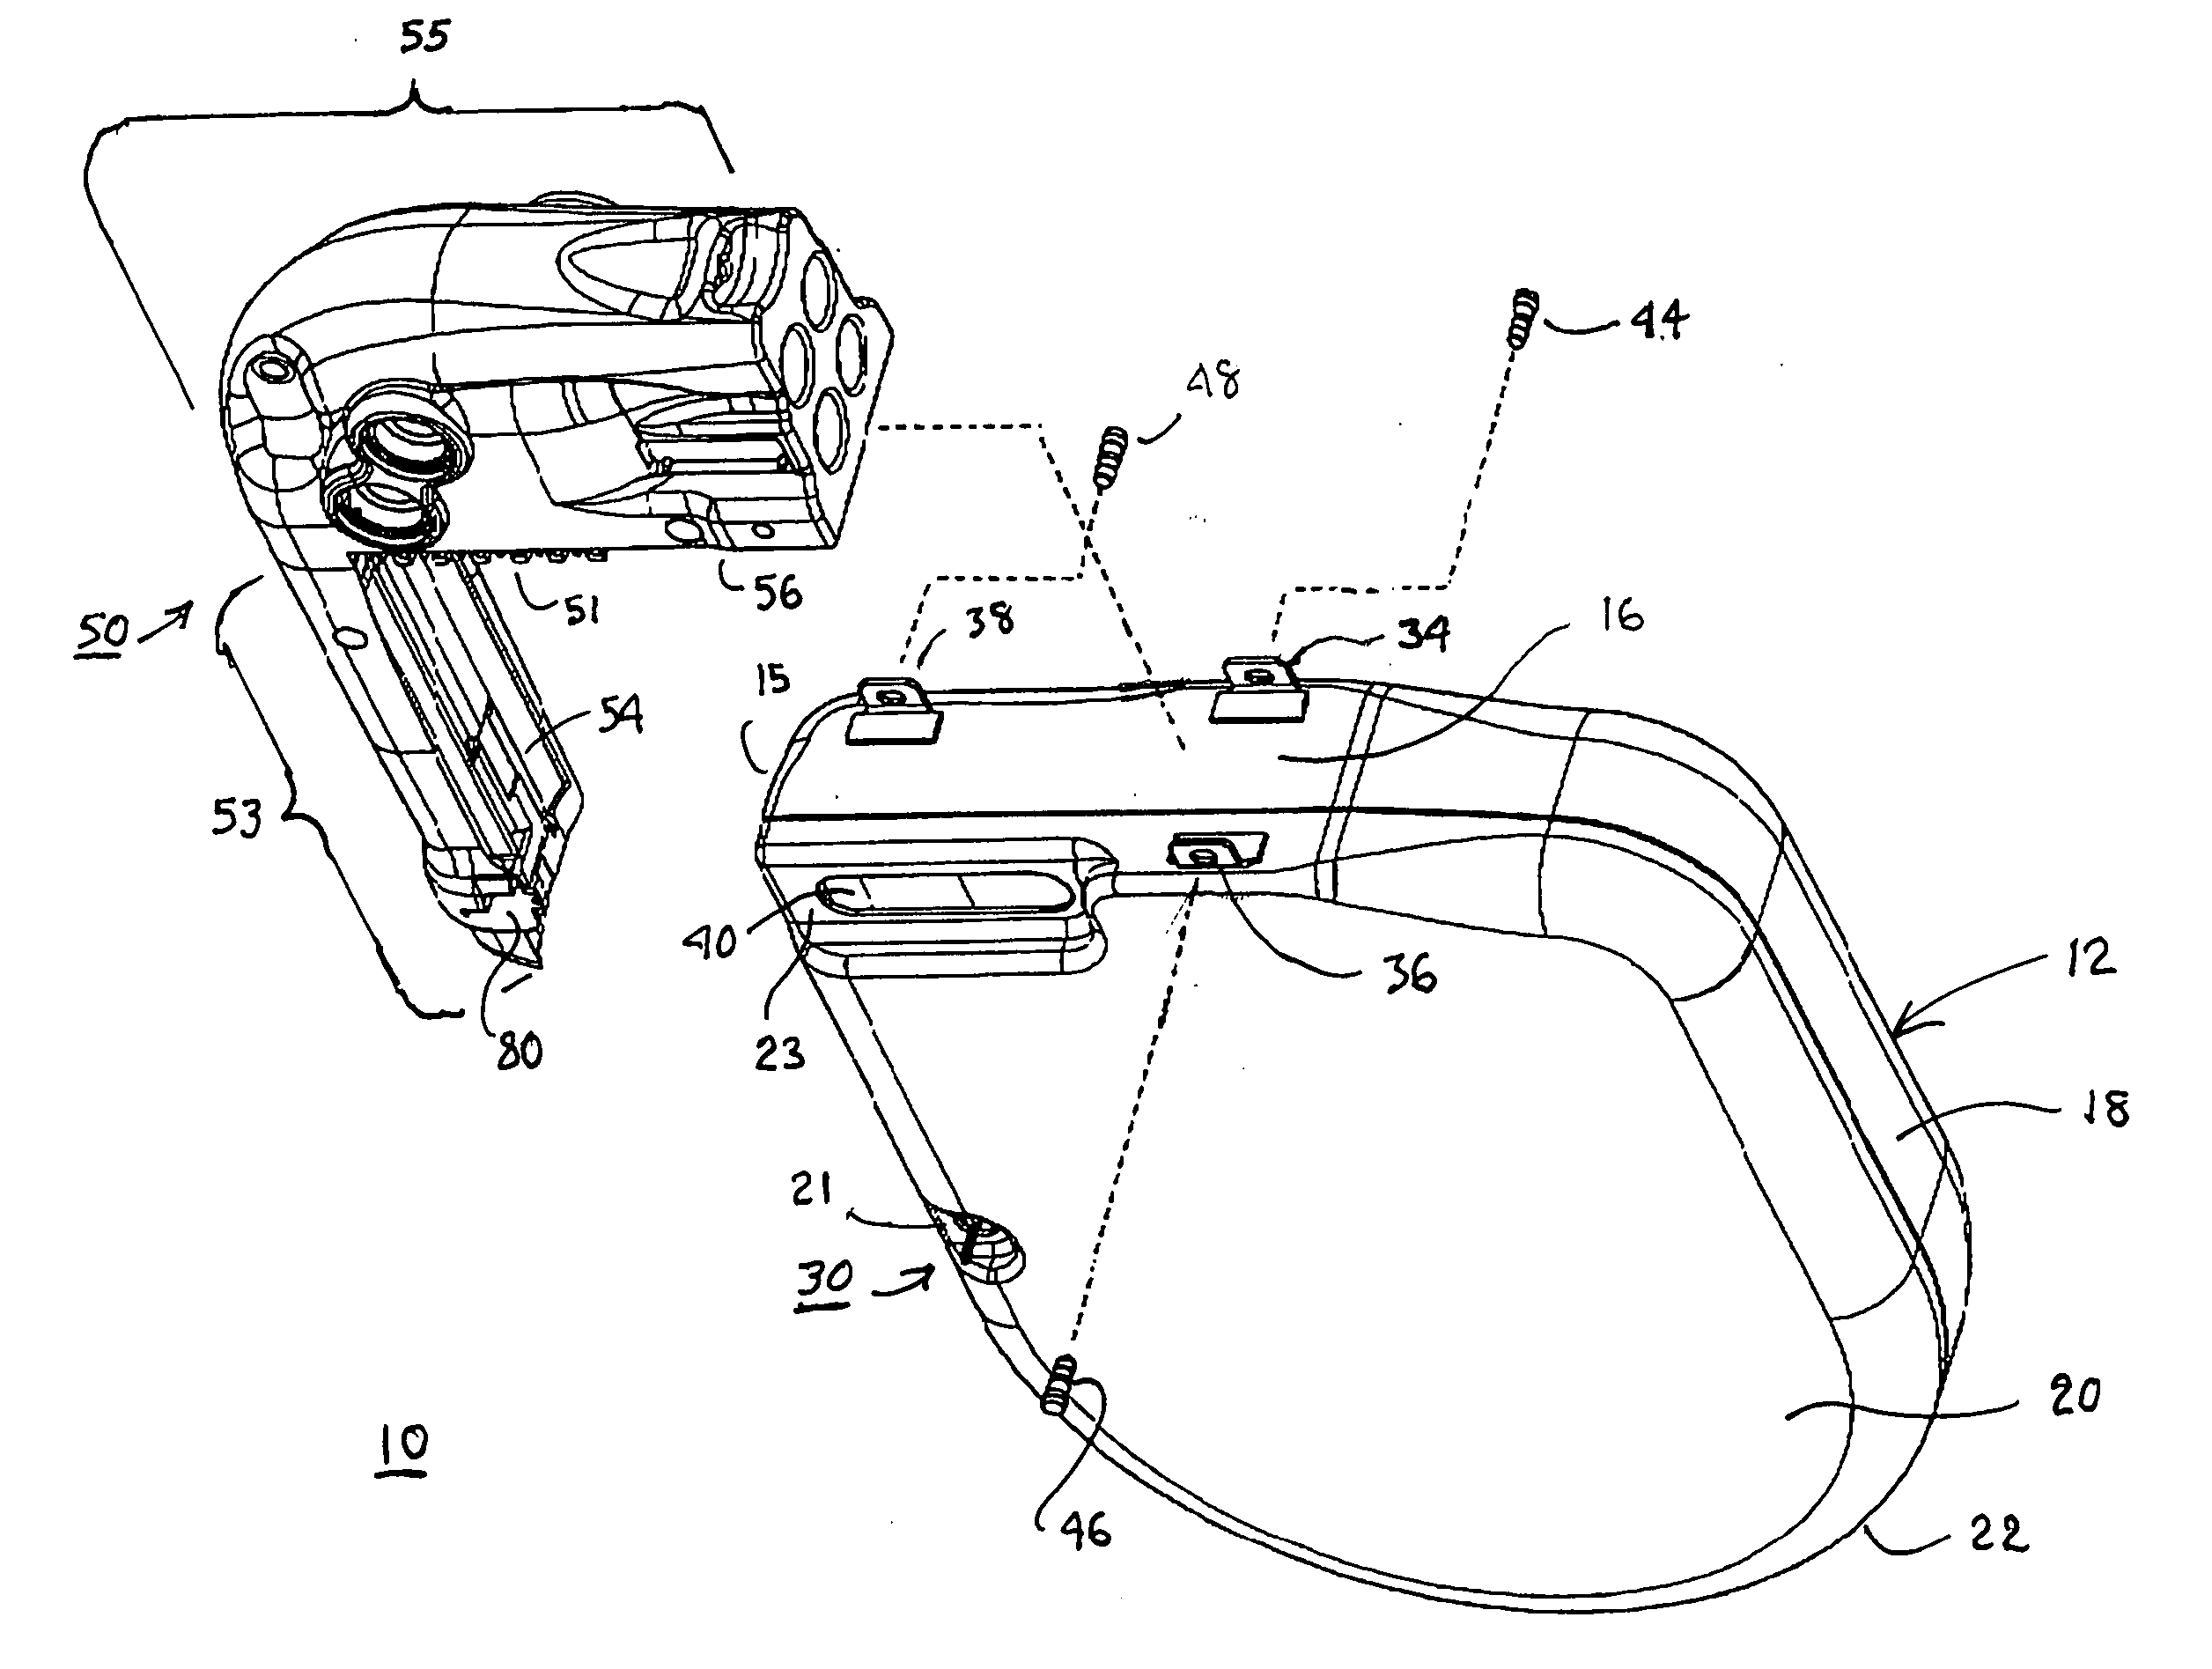 Telemetry antenna for an implantable medical device